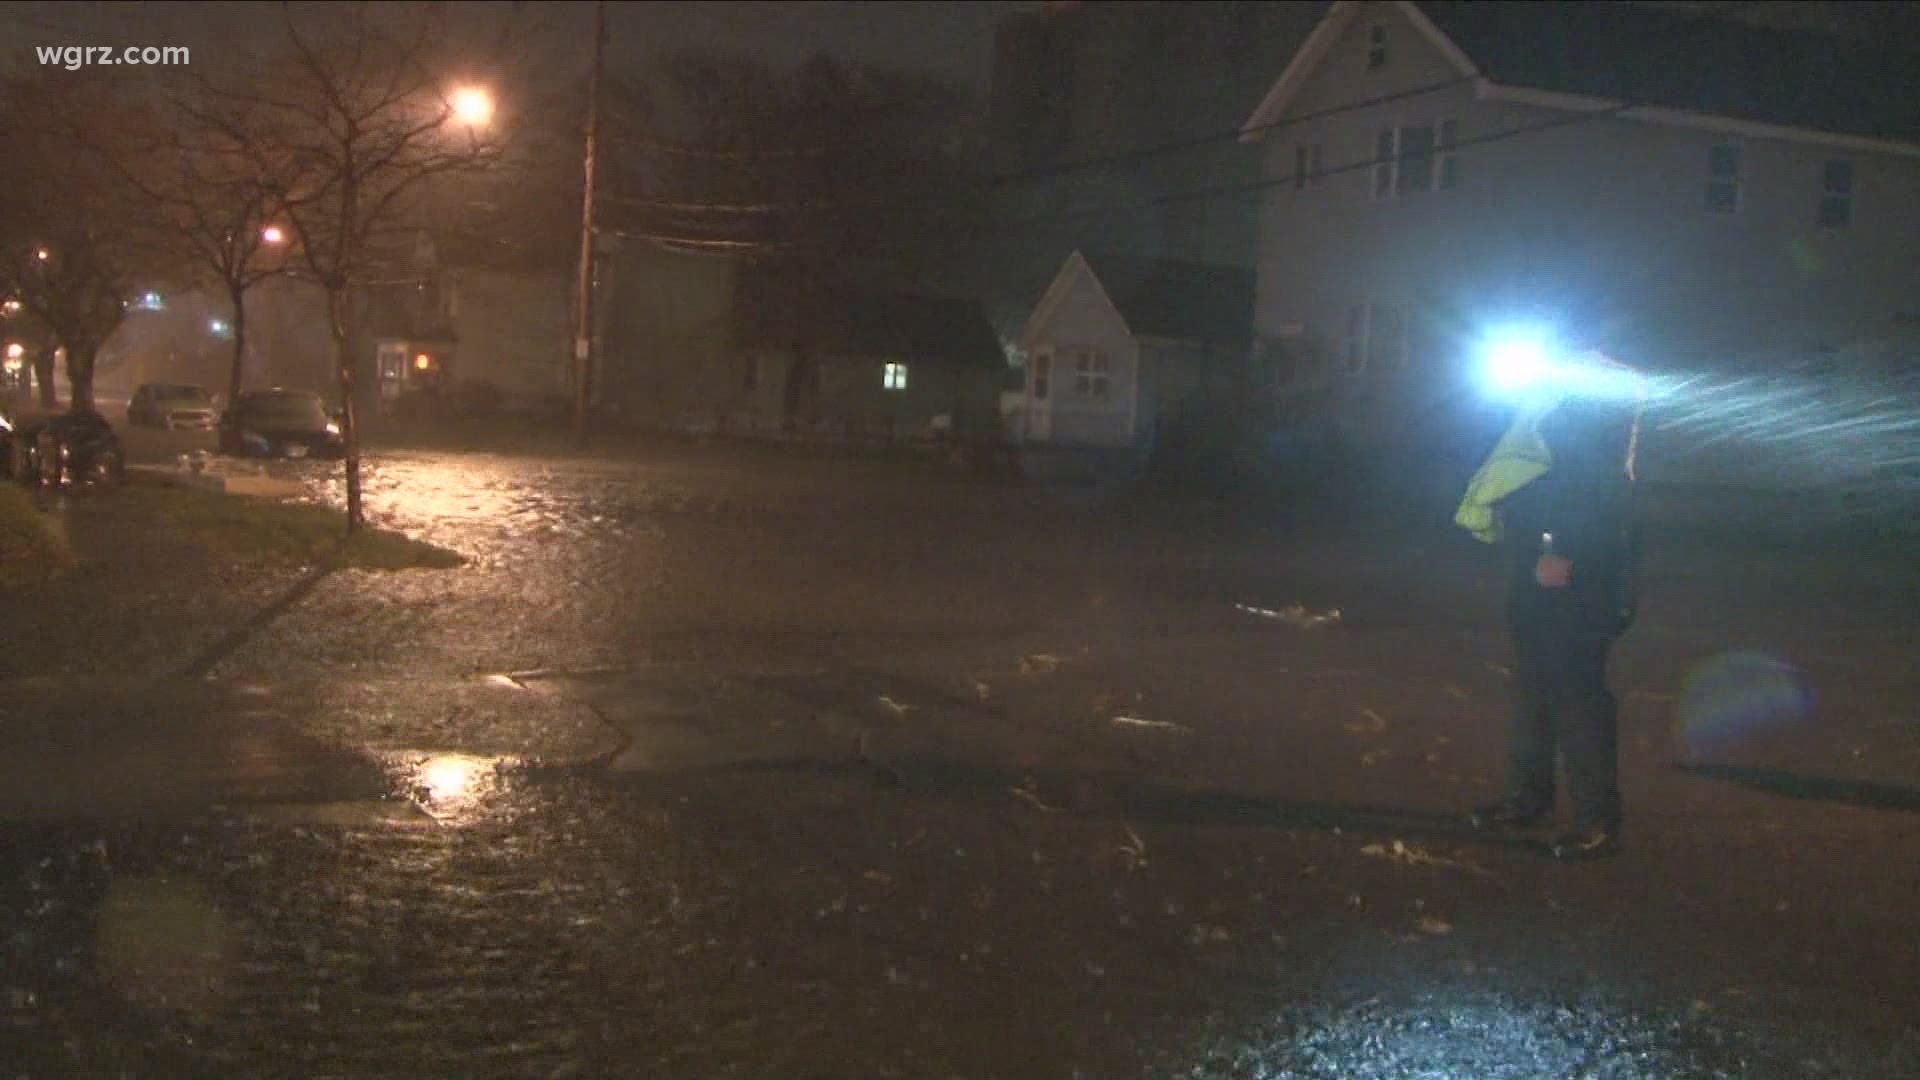 Large tree branches blocked traffic, then all of a sudden a rush of water flooded the Old First Ward in Buffalo, causing streets to be shutdown.